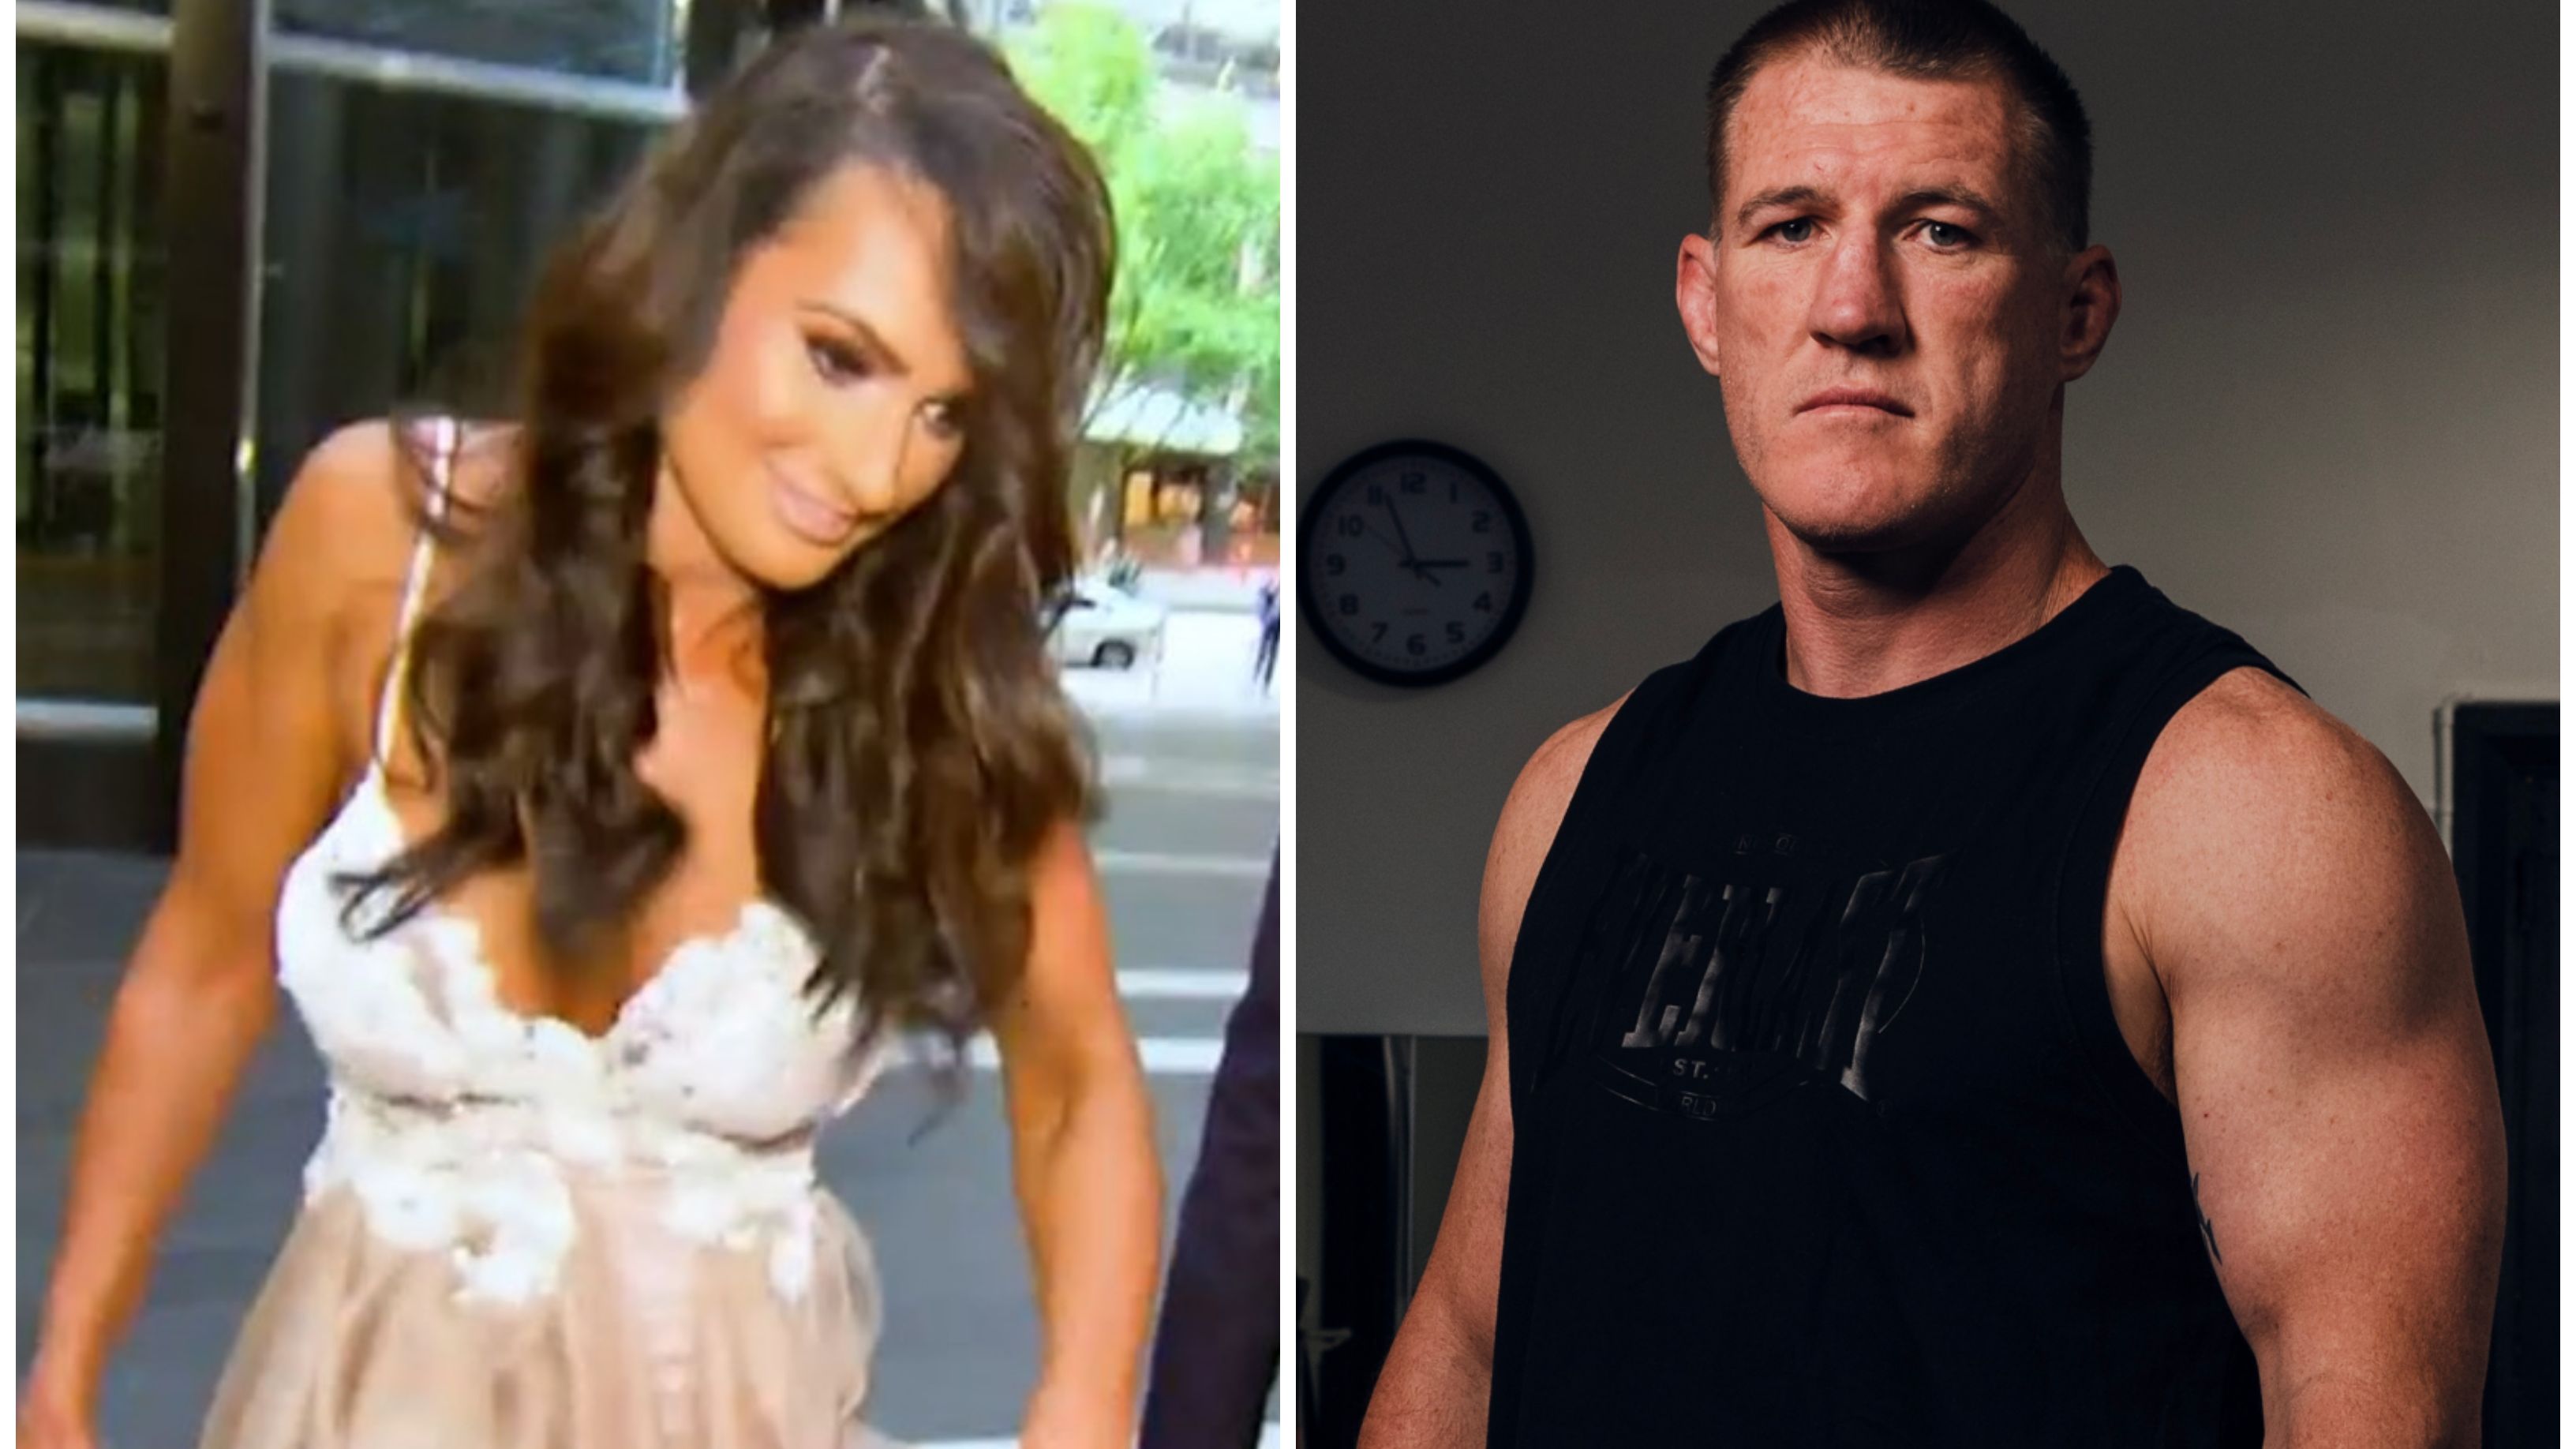 Paul Gallen 'wouldn't support' Arabella del Busso fighting on his undercard